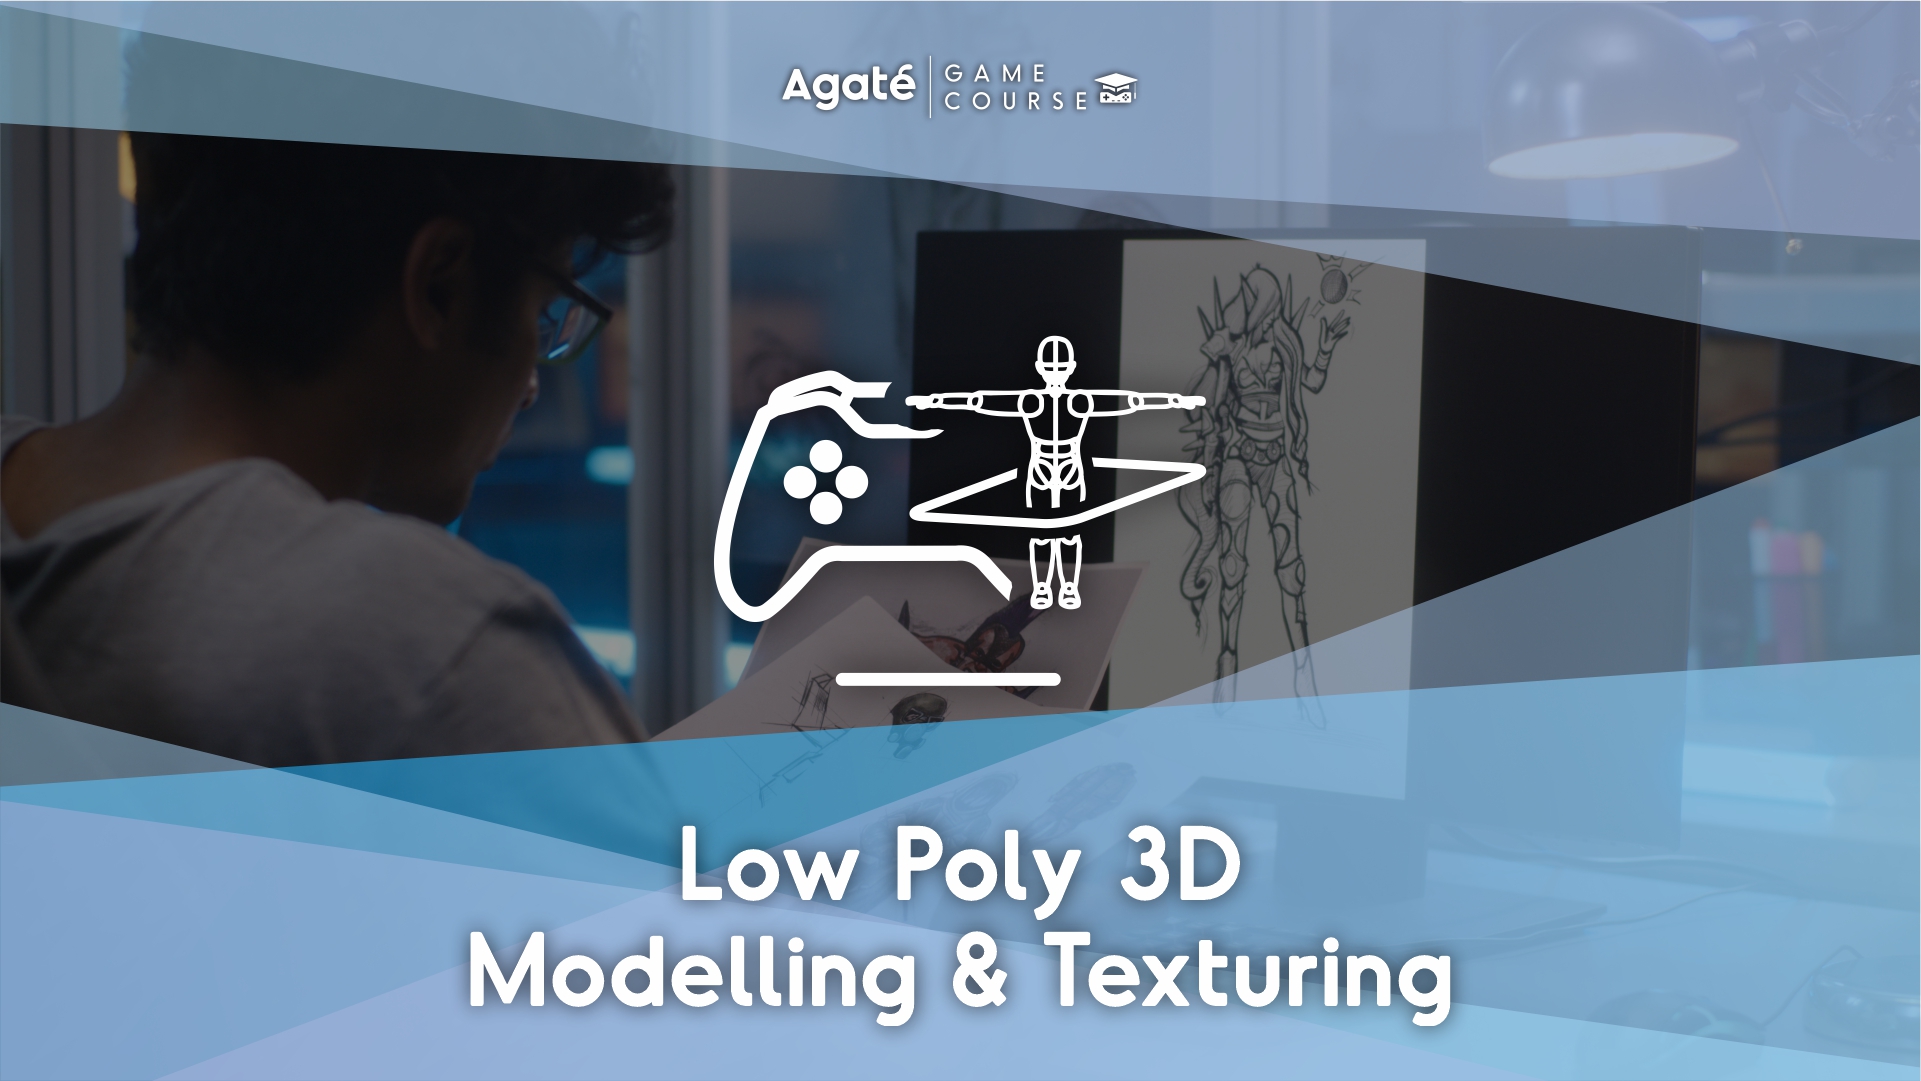 Low Poly 3D Modeling & Texturing Batch 2